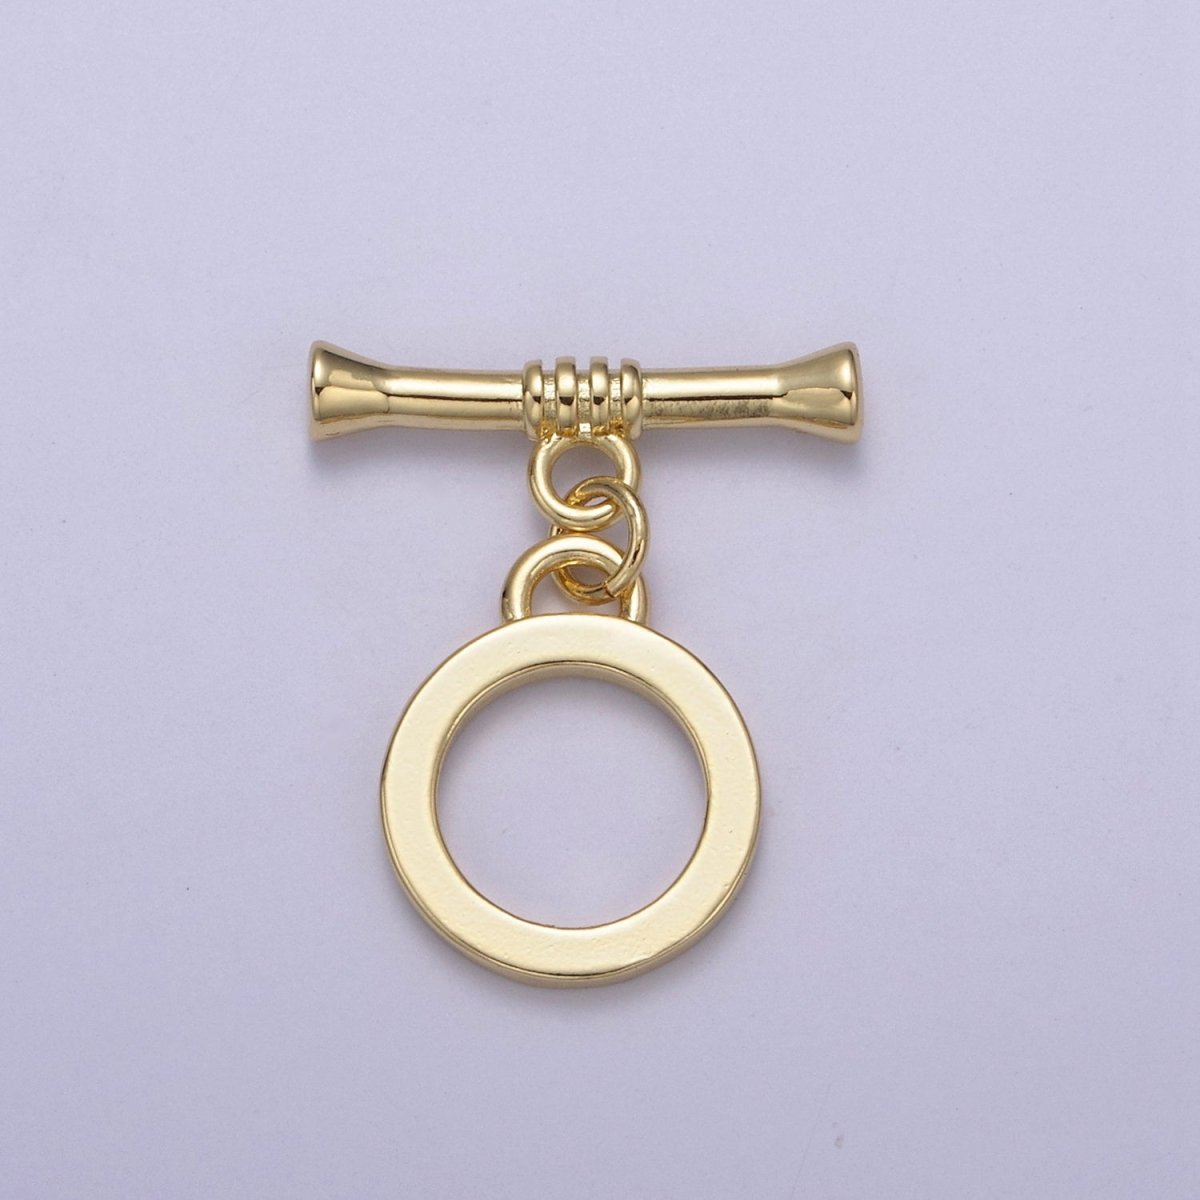 Classics Toggle, High Quality Gold Toggle Clasp, T Bar Fasteners for Necklace, Fancy Bracelet Closures, Designer's Toggles L-673 - DLUXCA